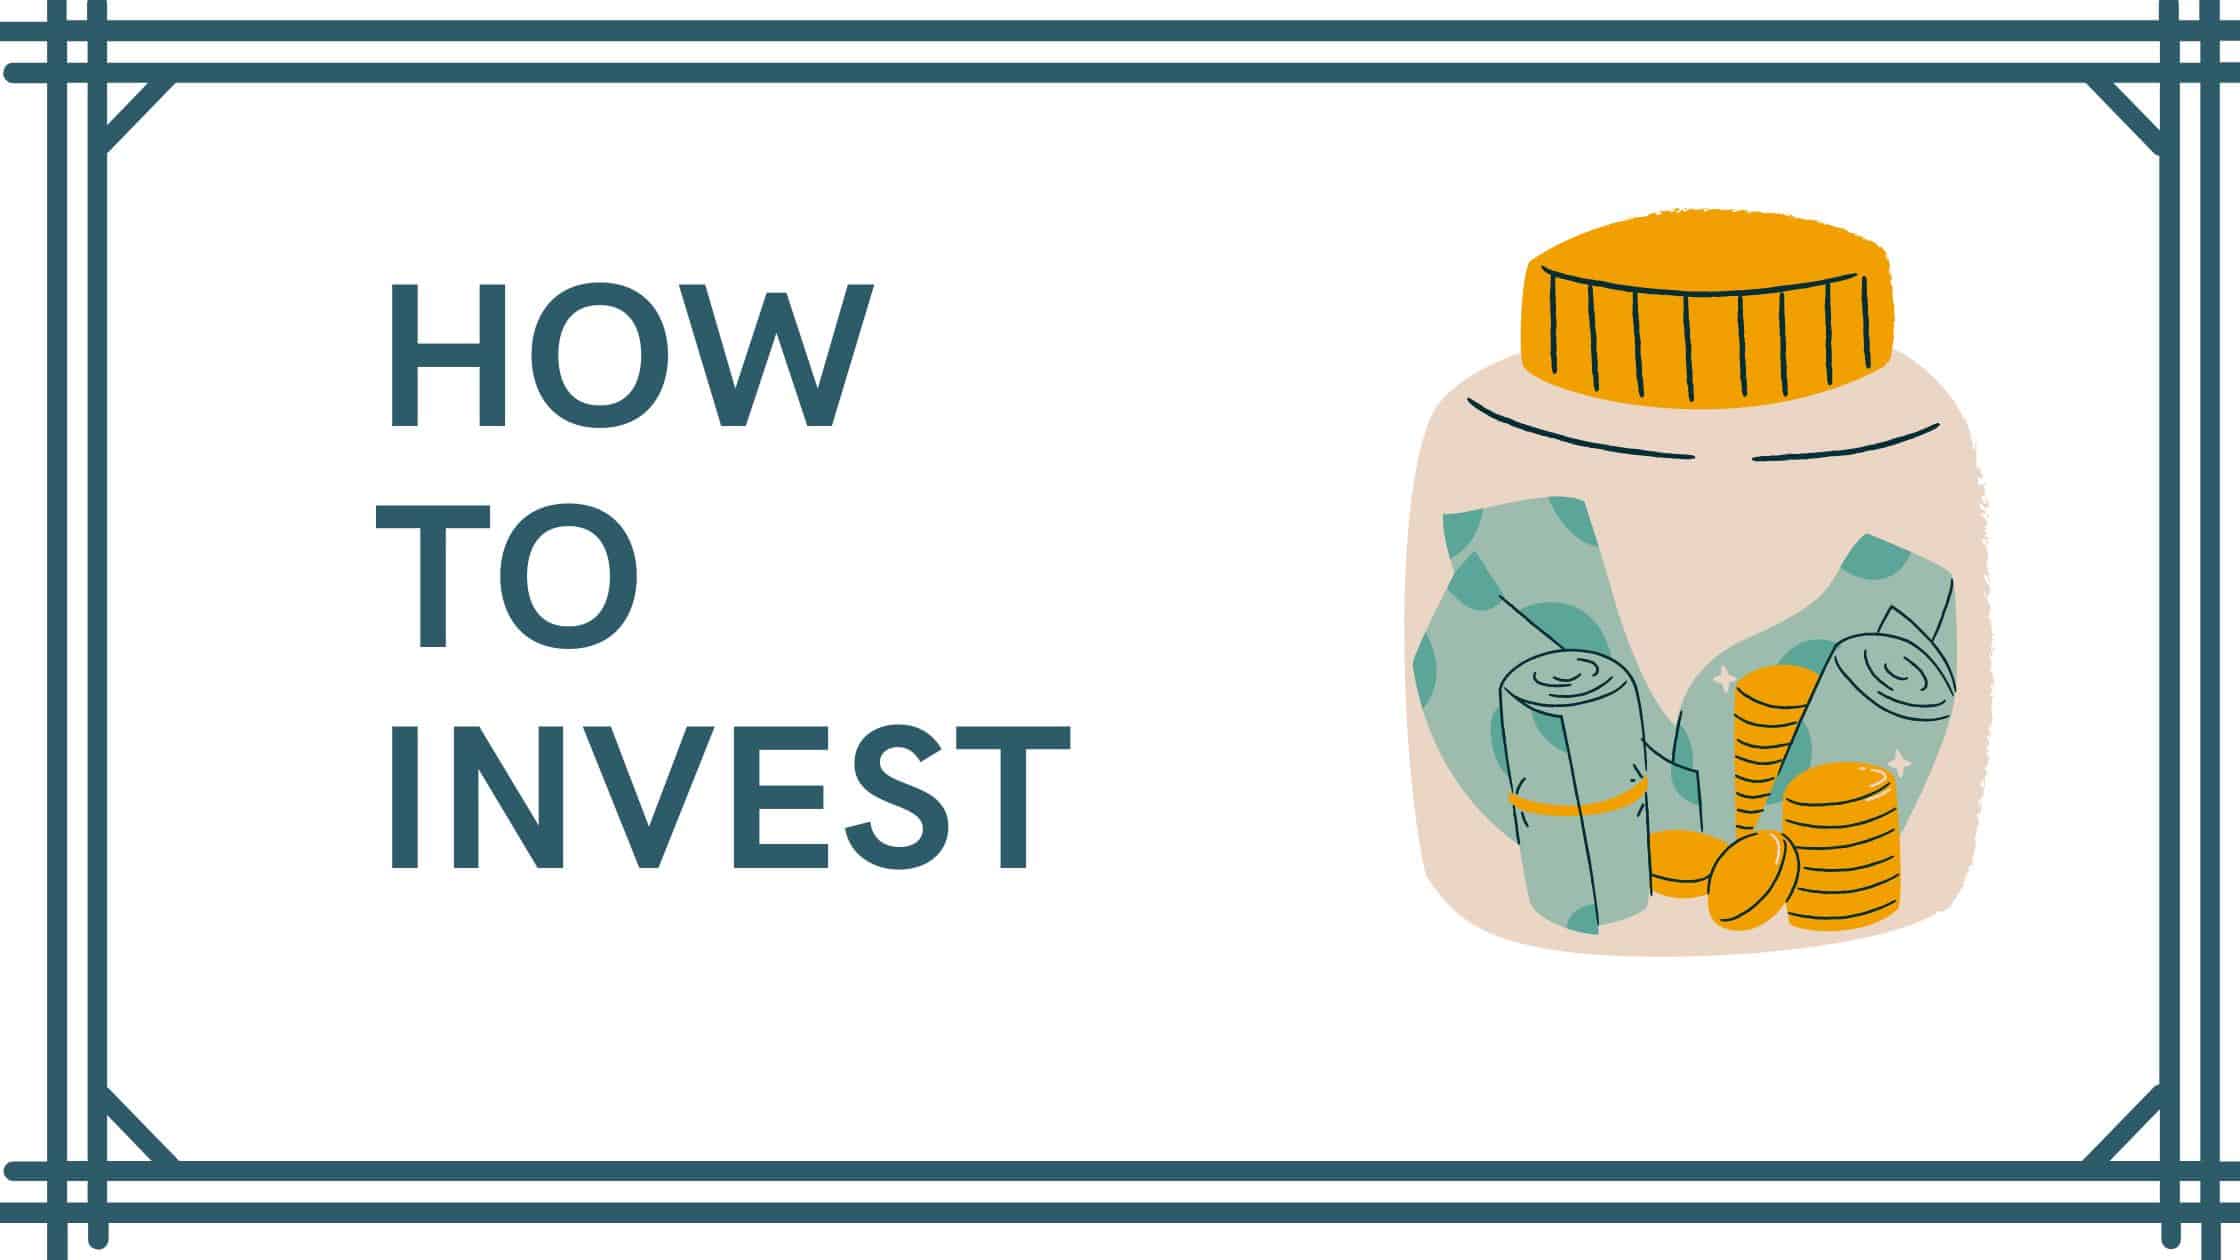 How to invest?